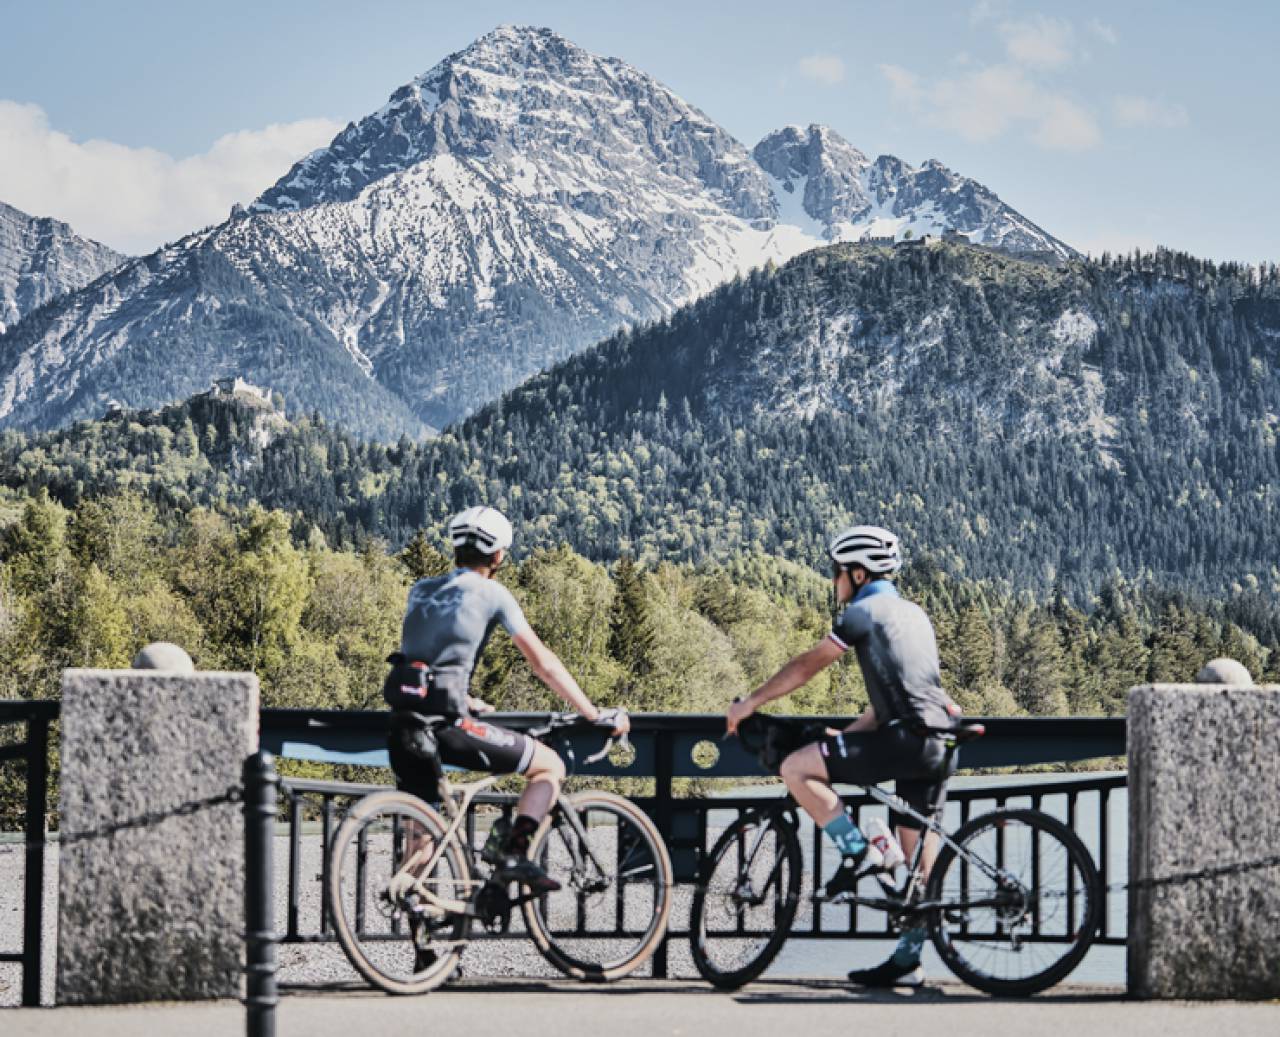 Cyclists taking a break with a view of the snow-covered mountains